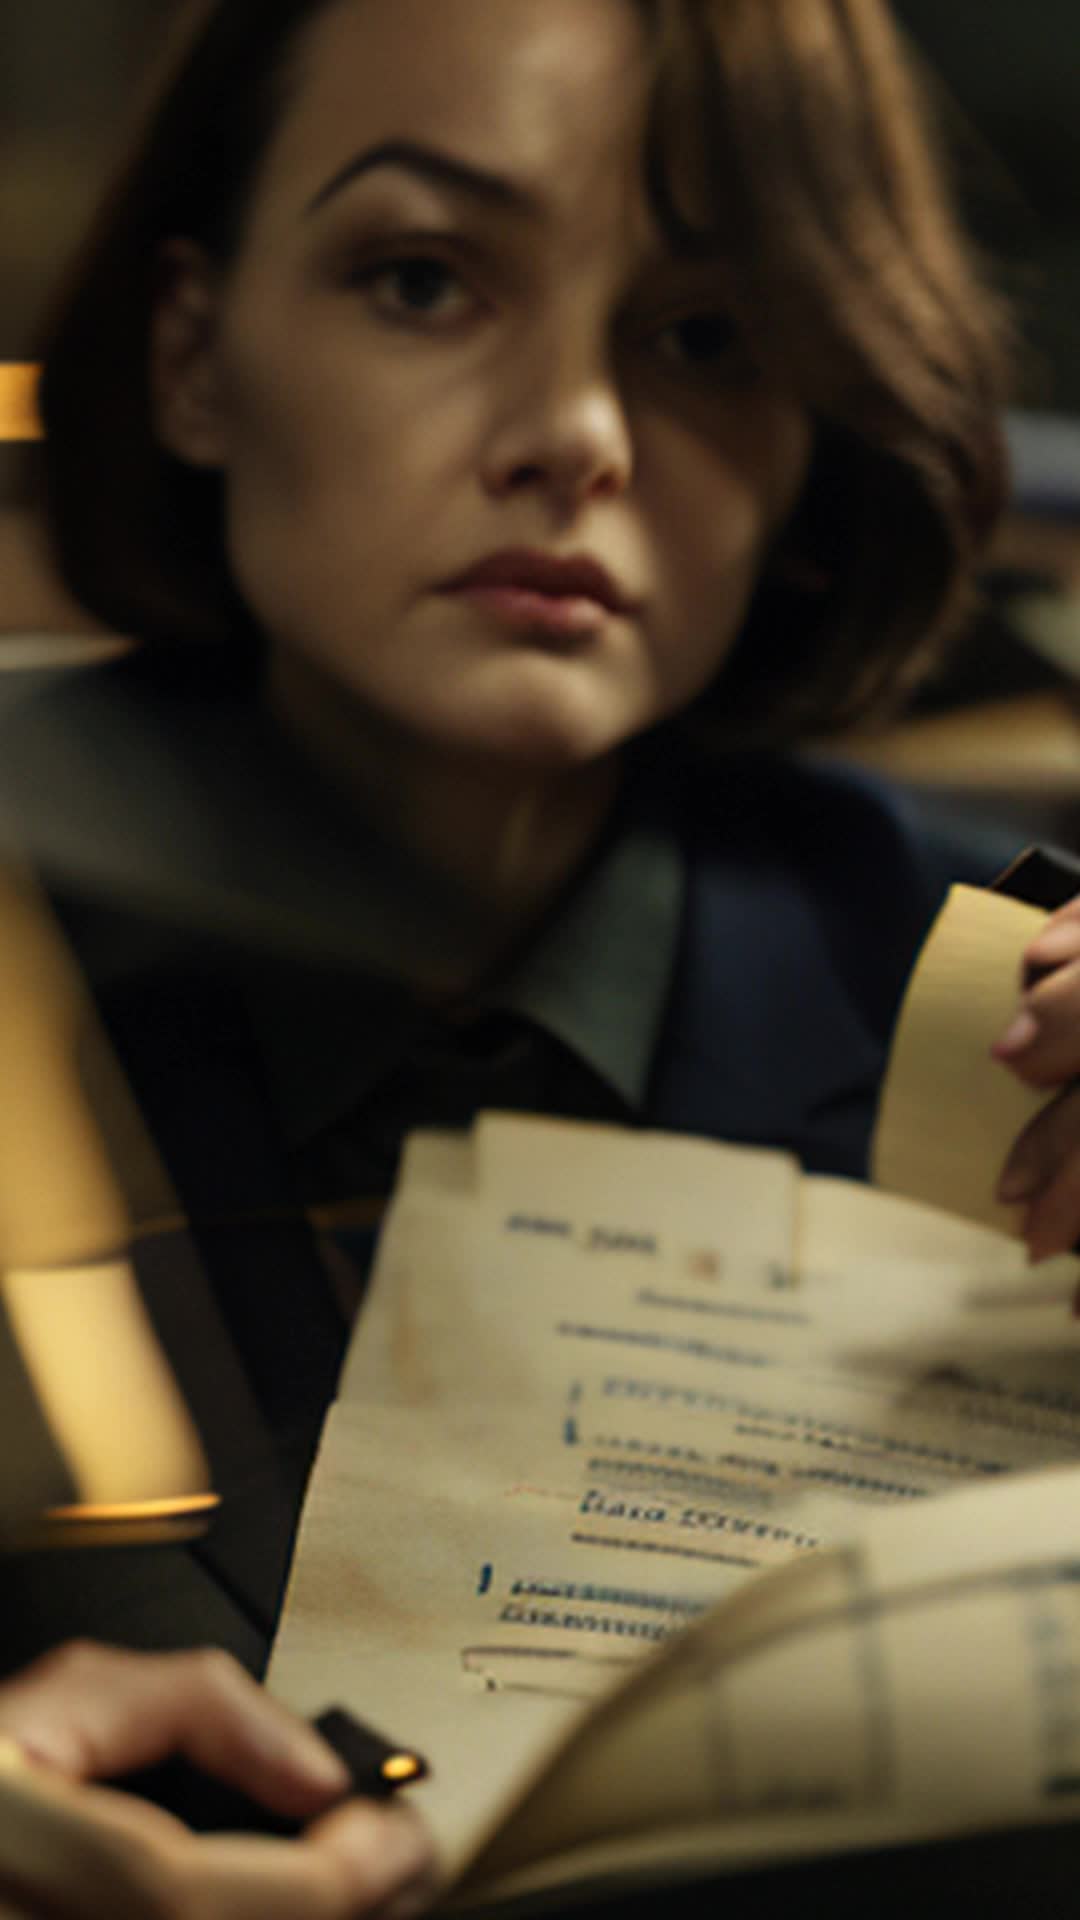 Journalist in archive, scribbling notes, connecting economic stabilization post-World War I, secretive meetings, soft lighting, detailed focus on handwritten notes and aged documents